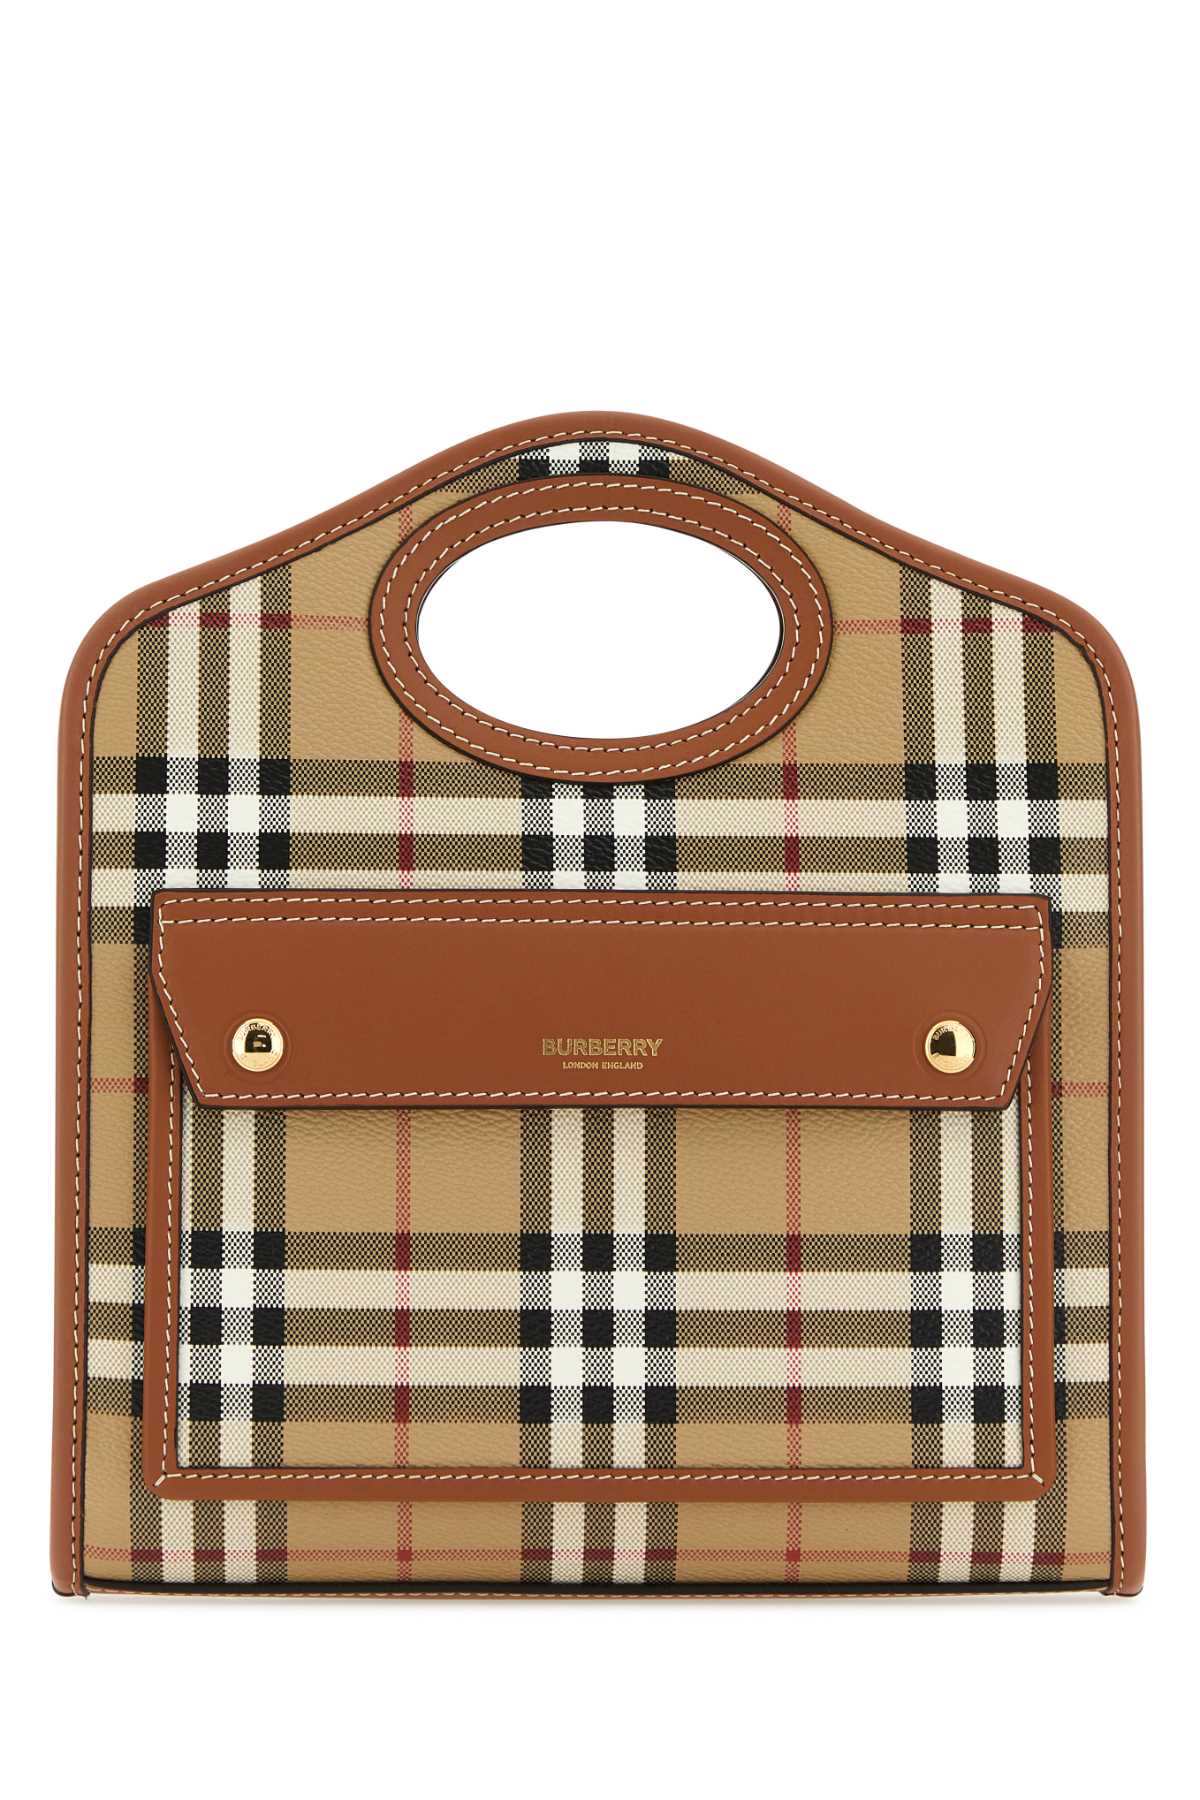 Shop Burberry Printed Canvas And Leather Mini Pocket Handbag In Briarbrown